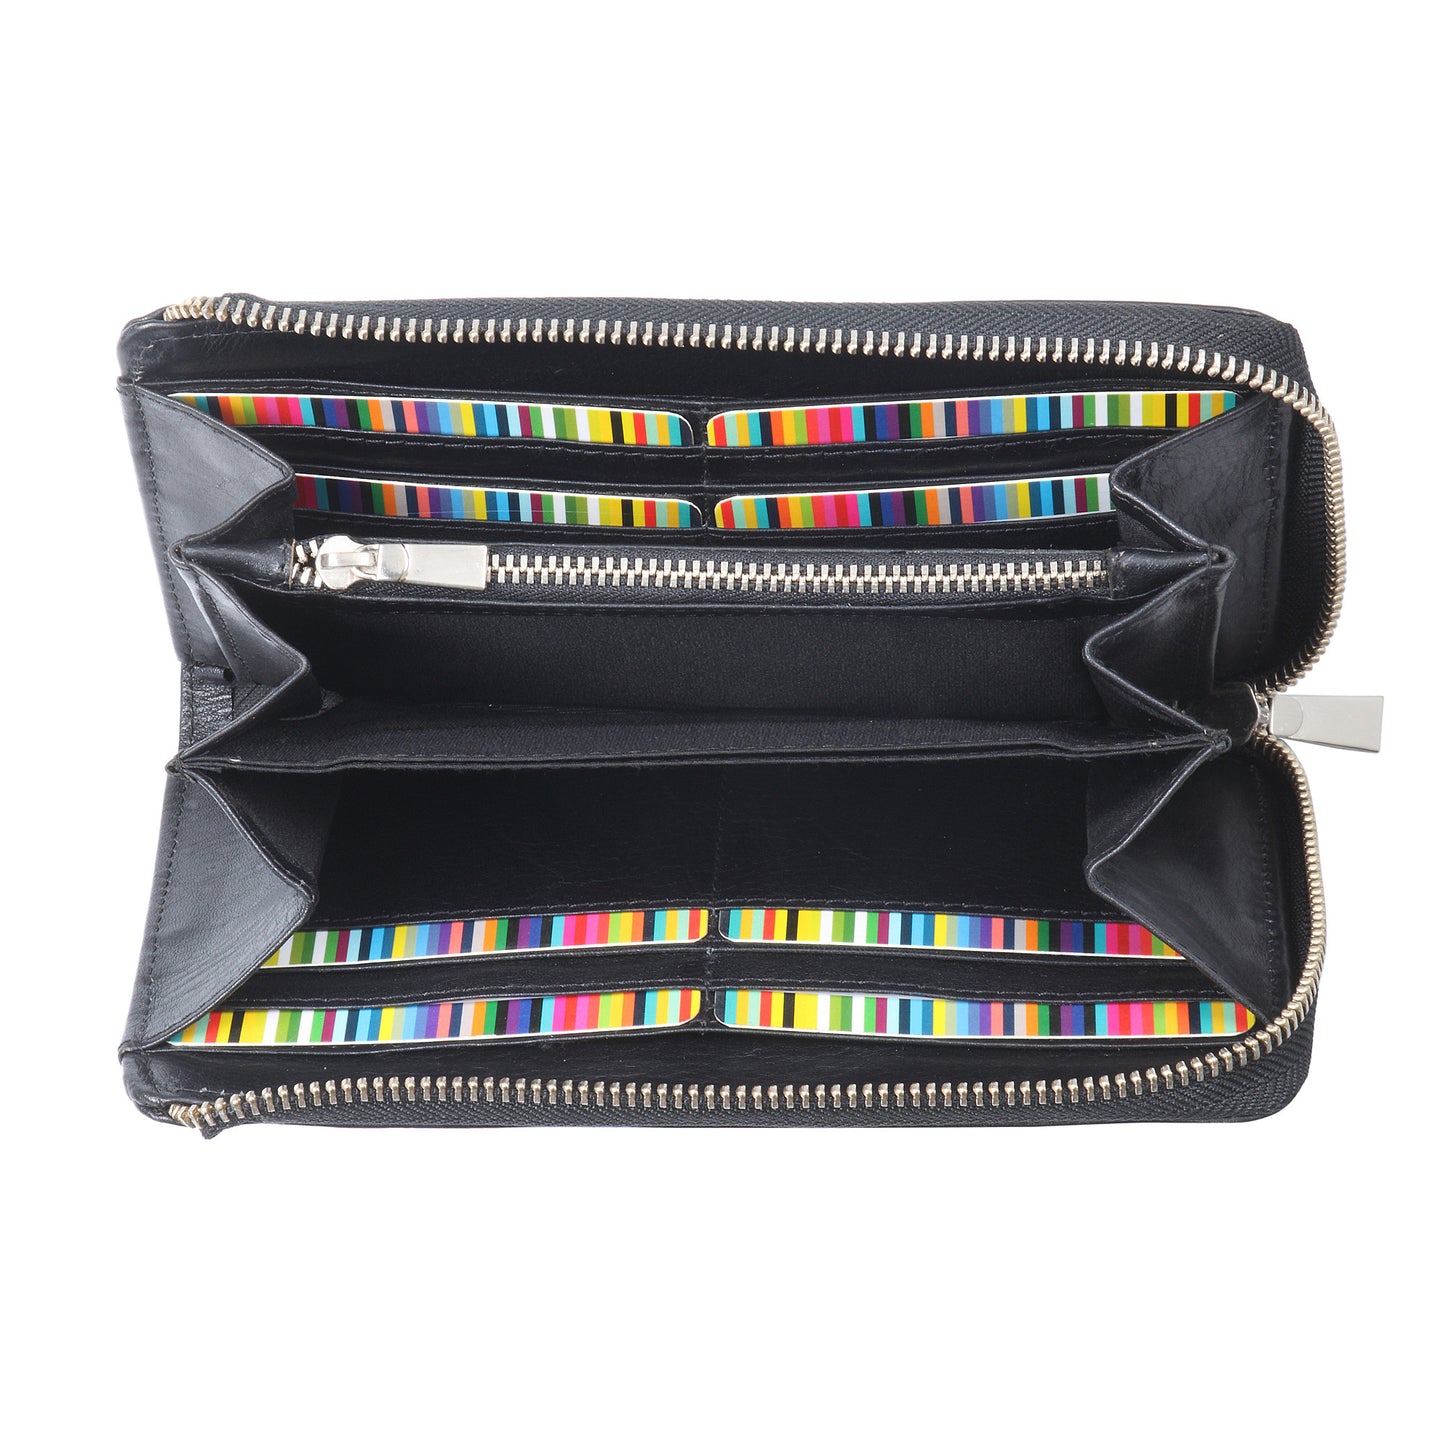 Style n Craft 301966-BL Ladies Zippered Clutch Wallet in Black Cow Leather - front open 2